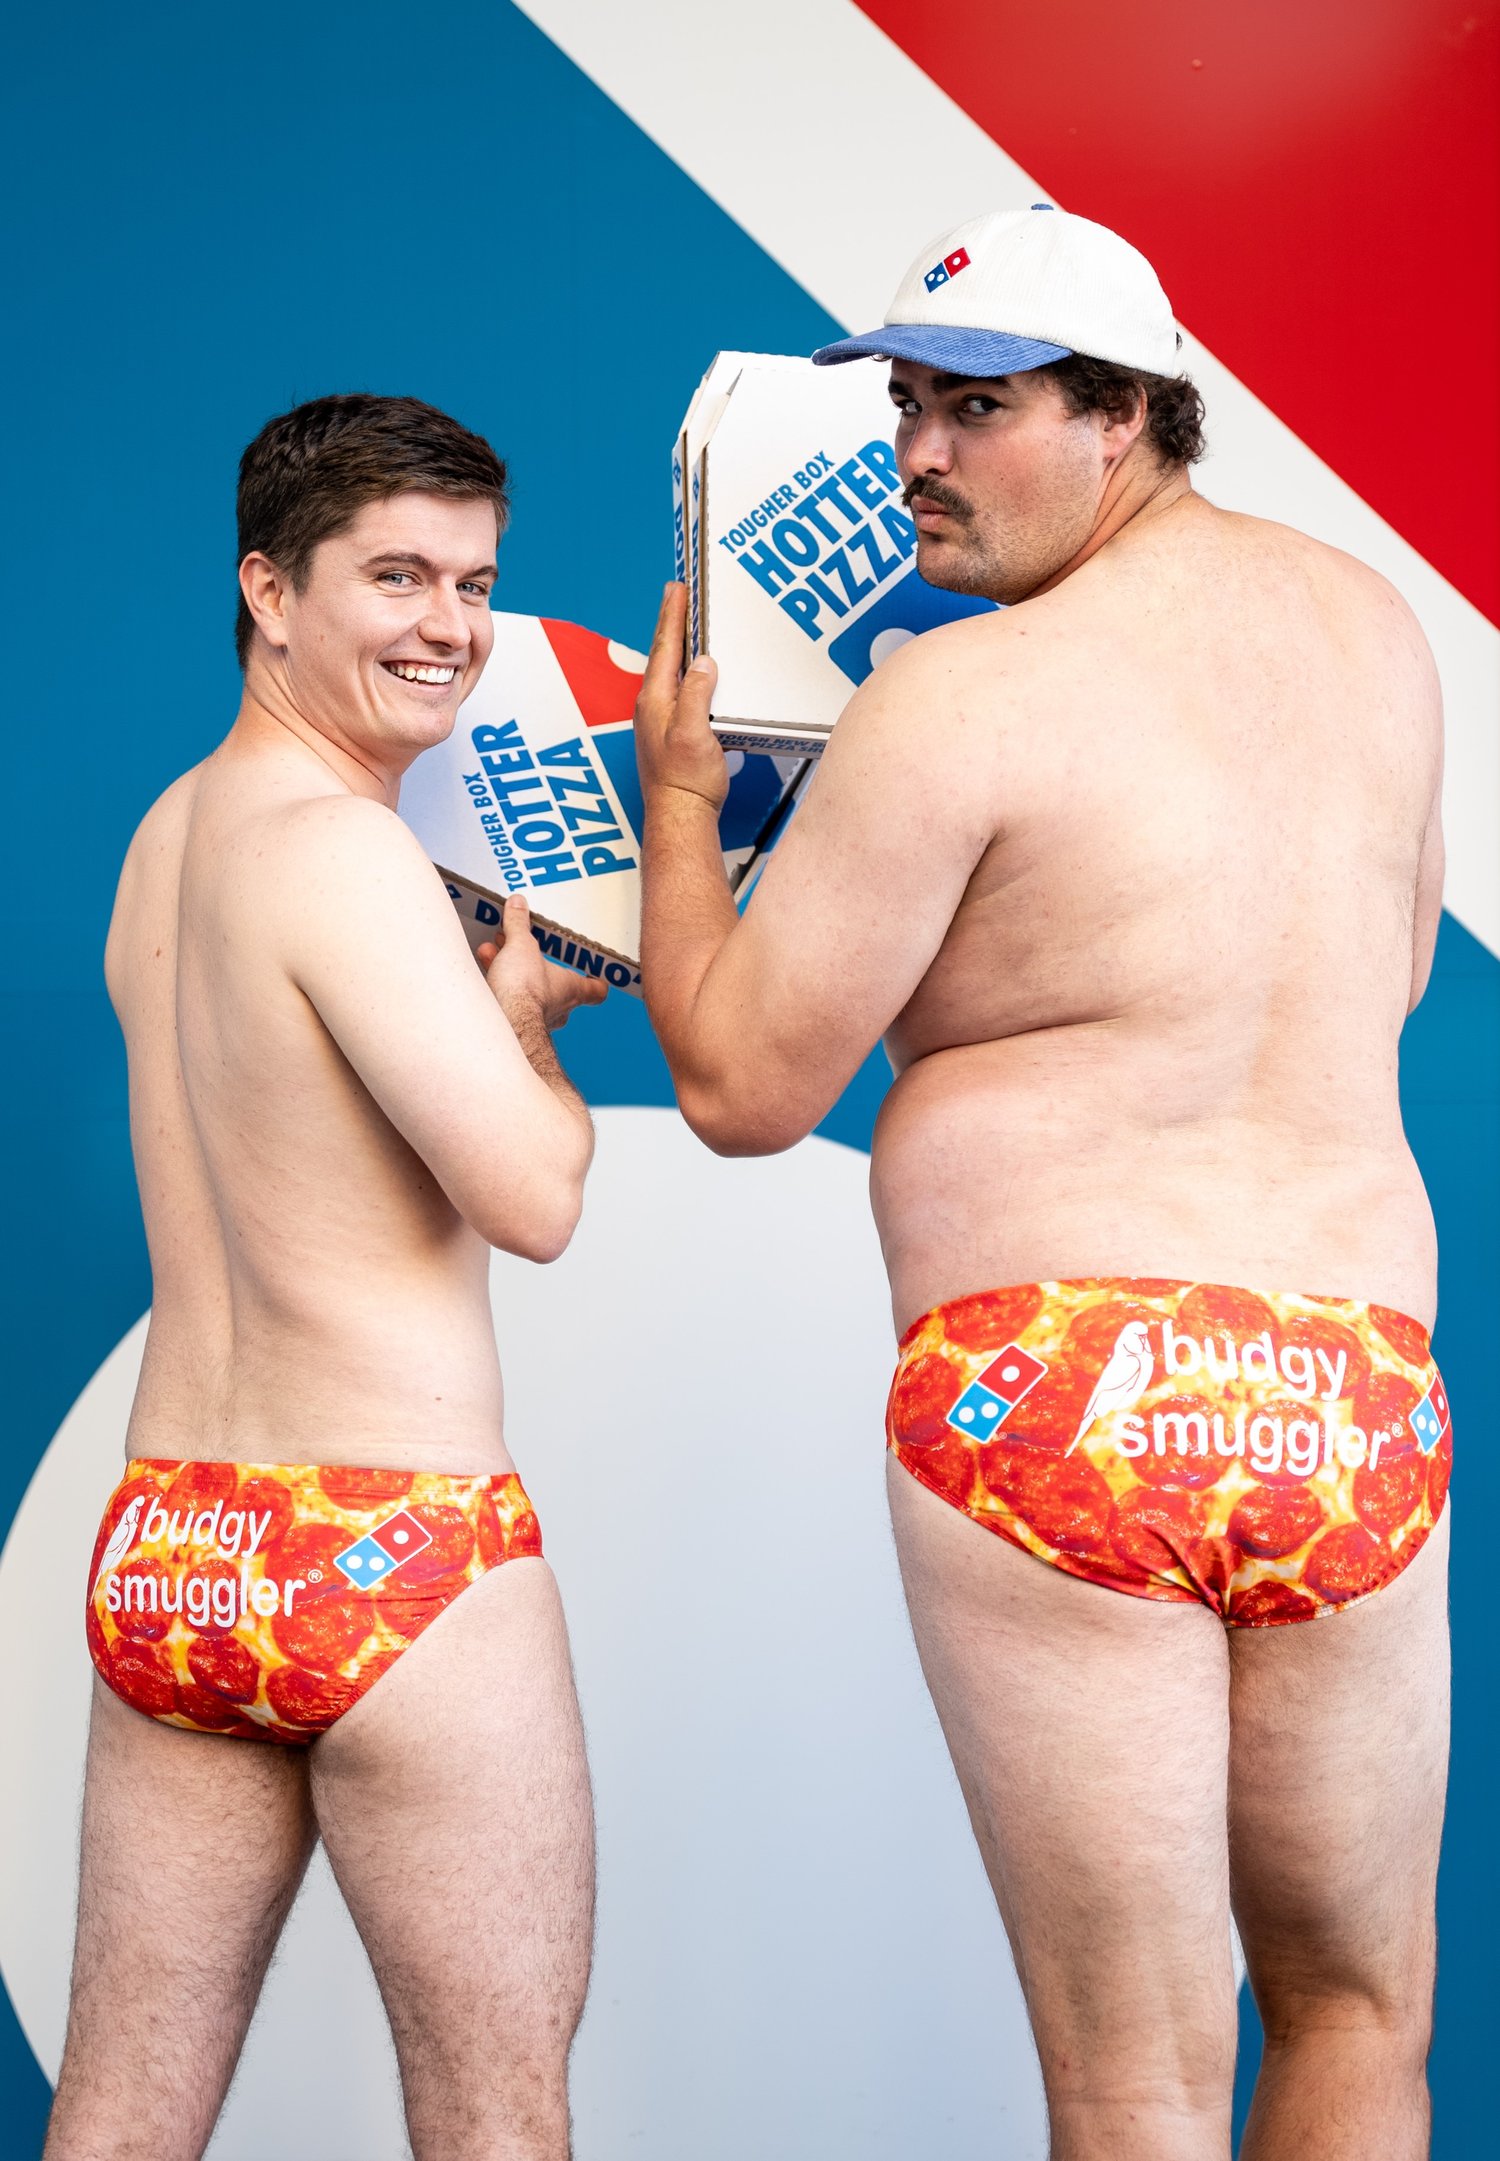 Feast Your Eyes: Domino's Delivers Pepperoni Budgy Smugglers for